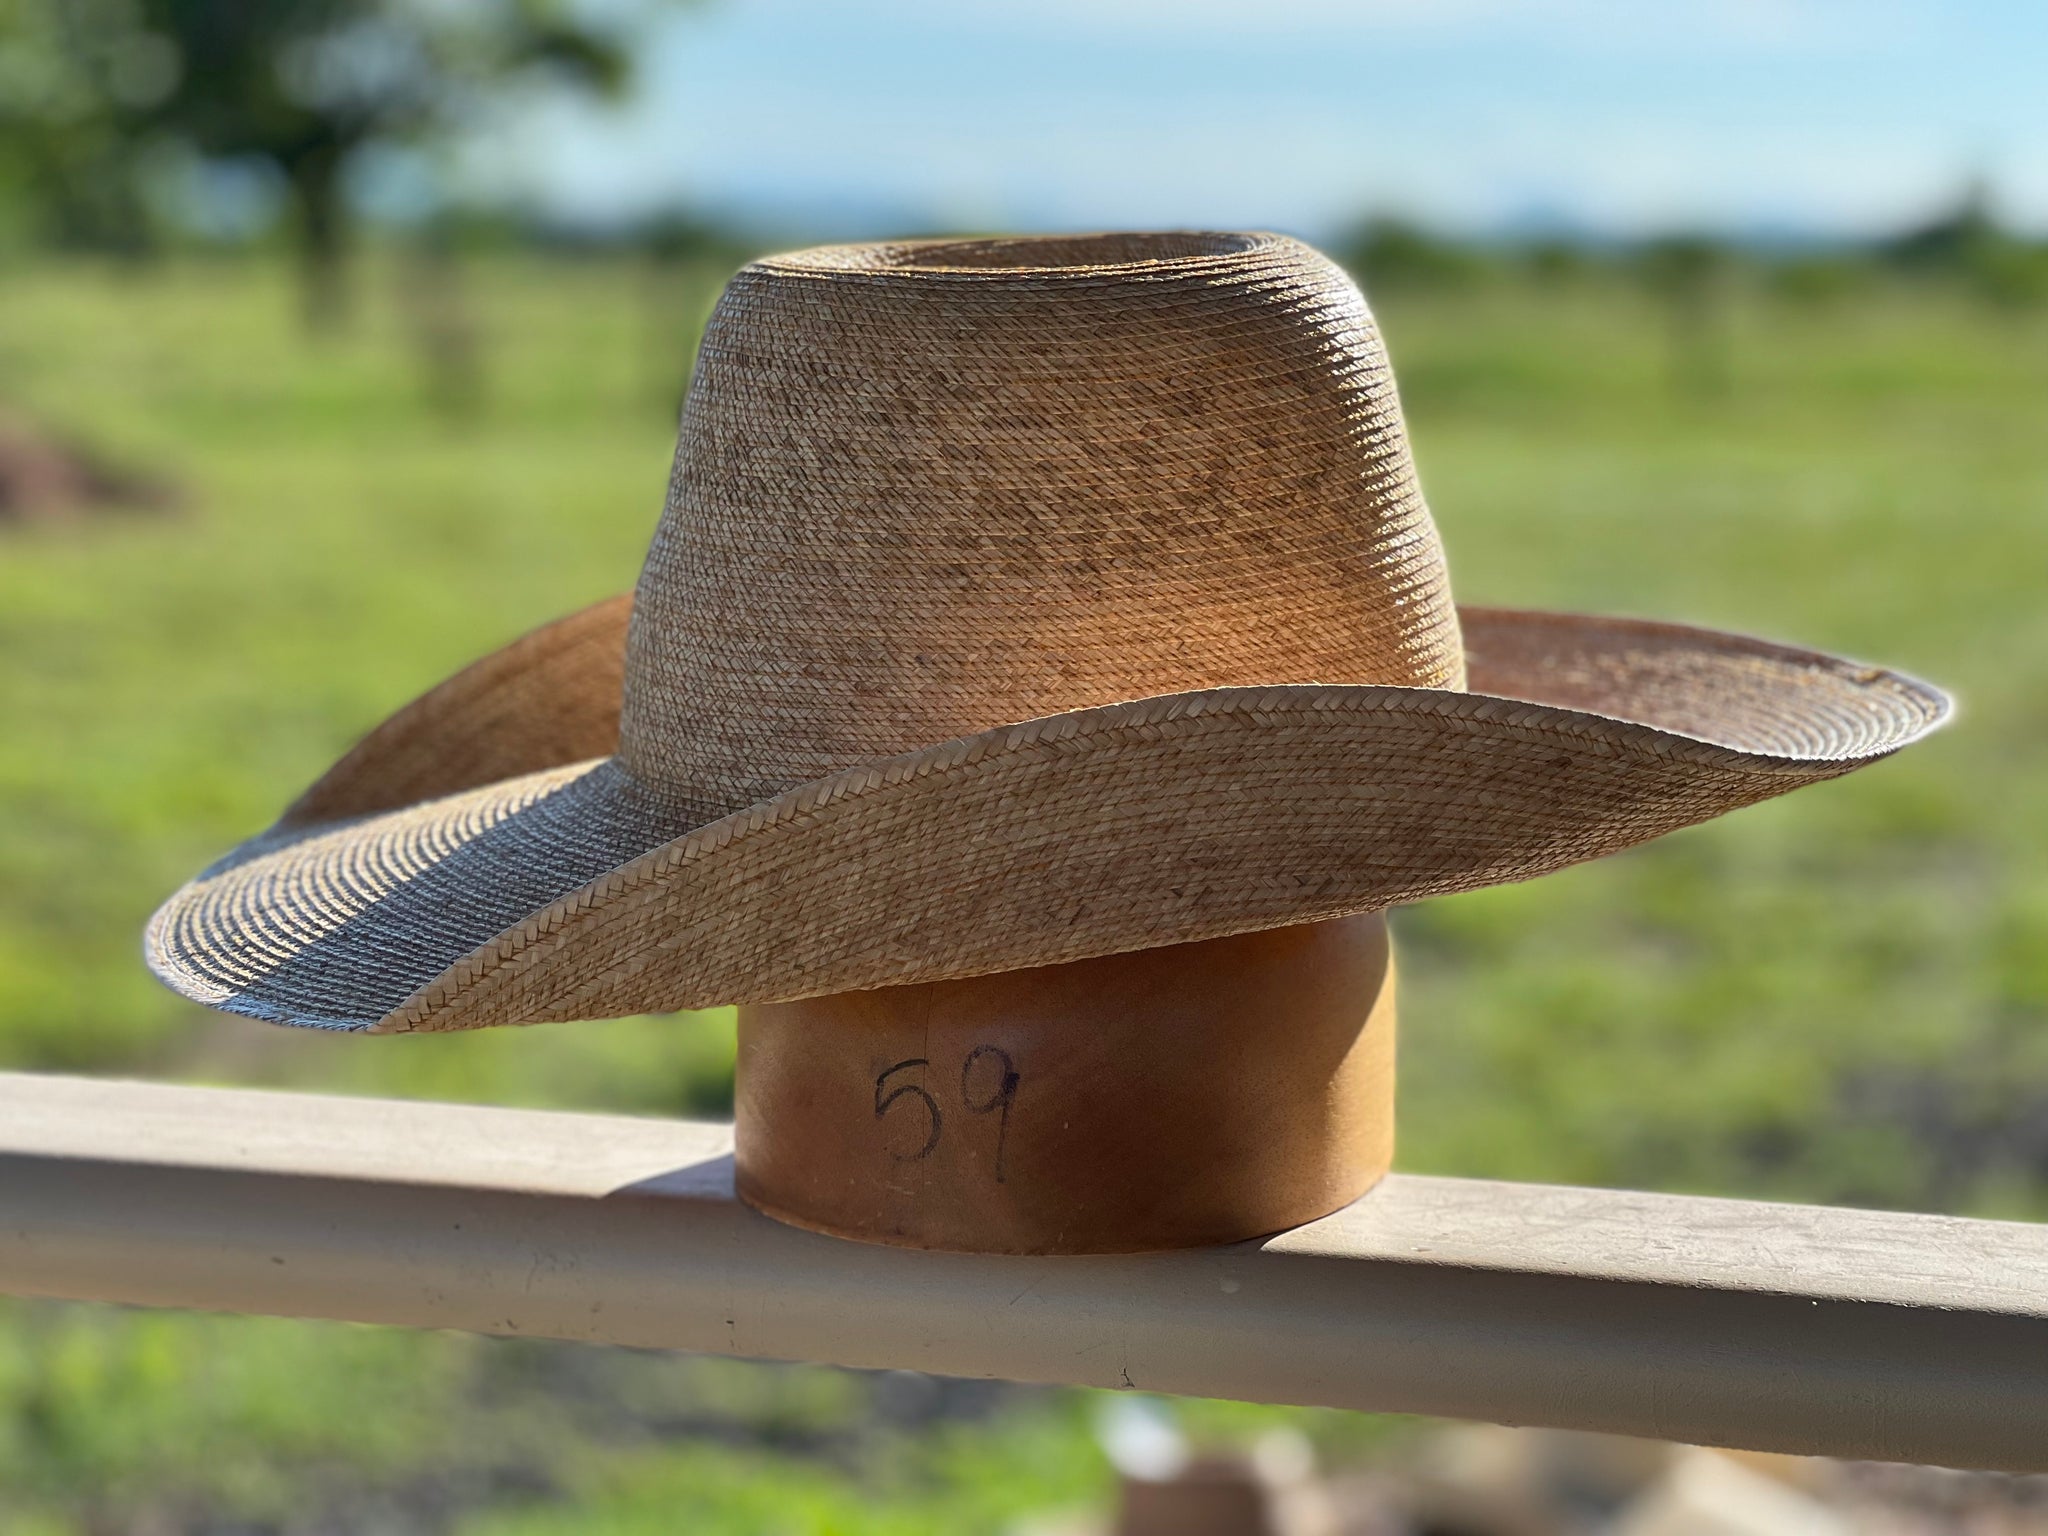 Jaxonbilt_Hats_are_Australian_made_palm_leaf_hats_and_crossbred_hats_for_cowgirls_and_cowboys_with_wide_brims_for_sun_protection_5”_brim_trim_on_edge_wide_crown_band_cool_hand_luke_shape_5”_brim_dark_oak